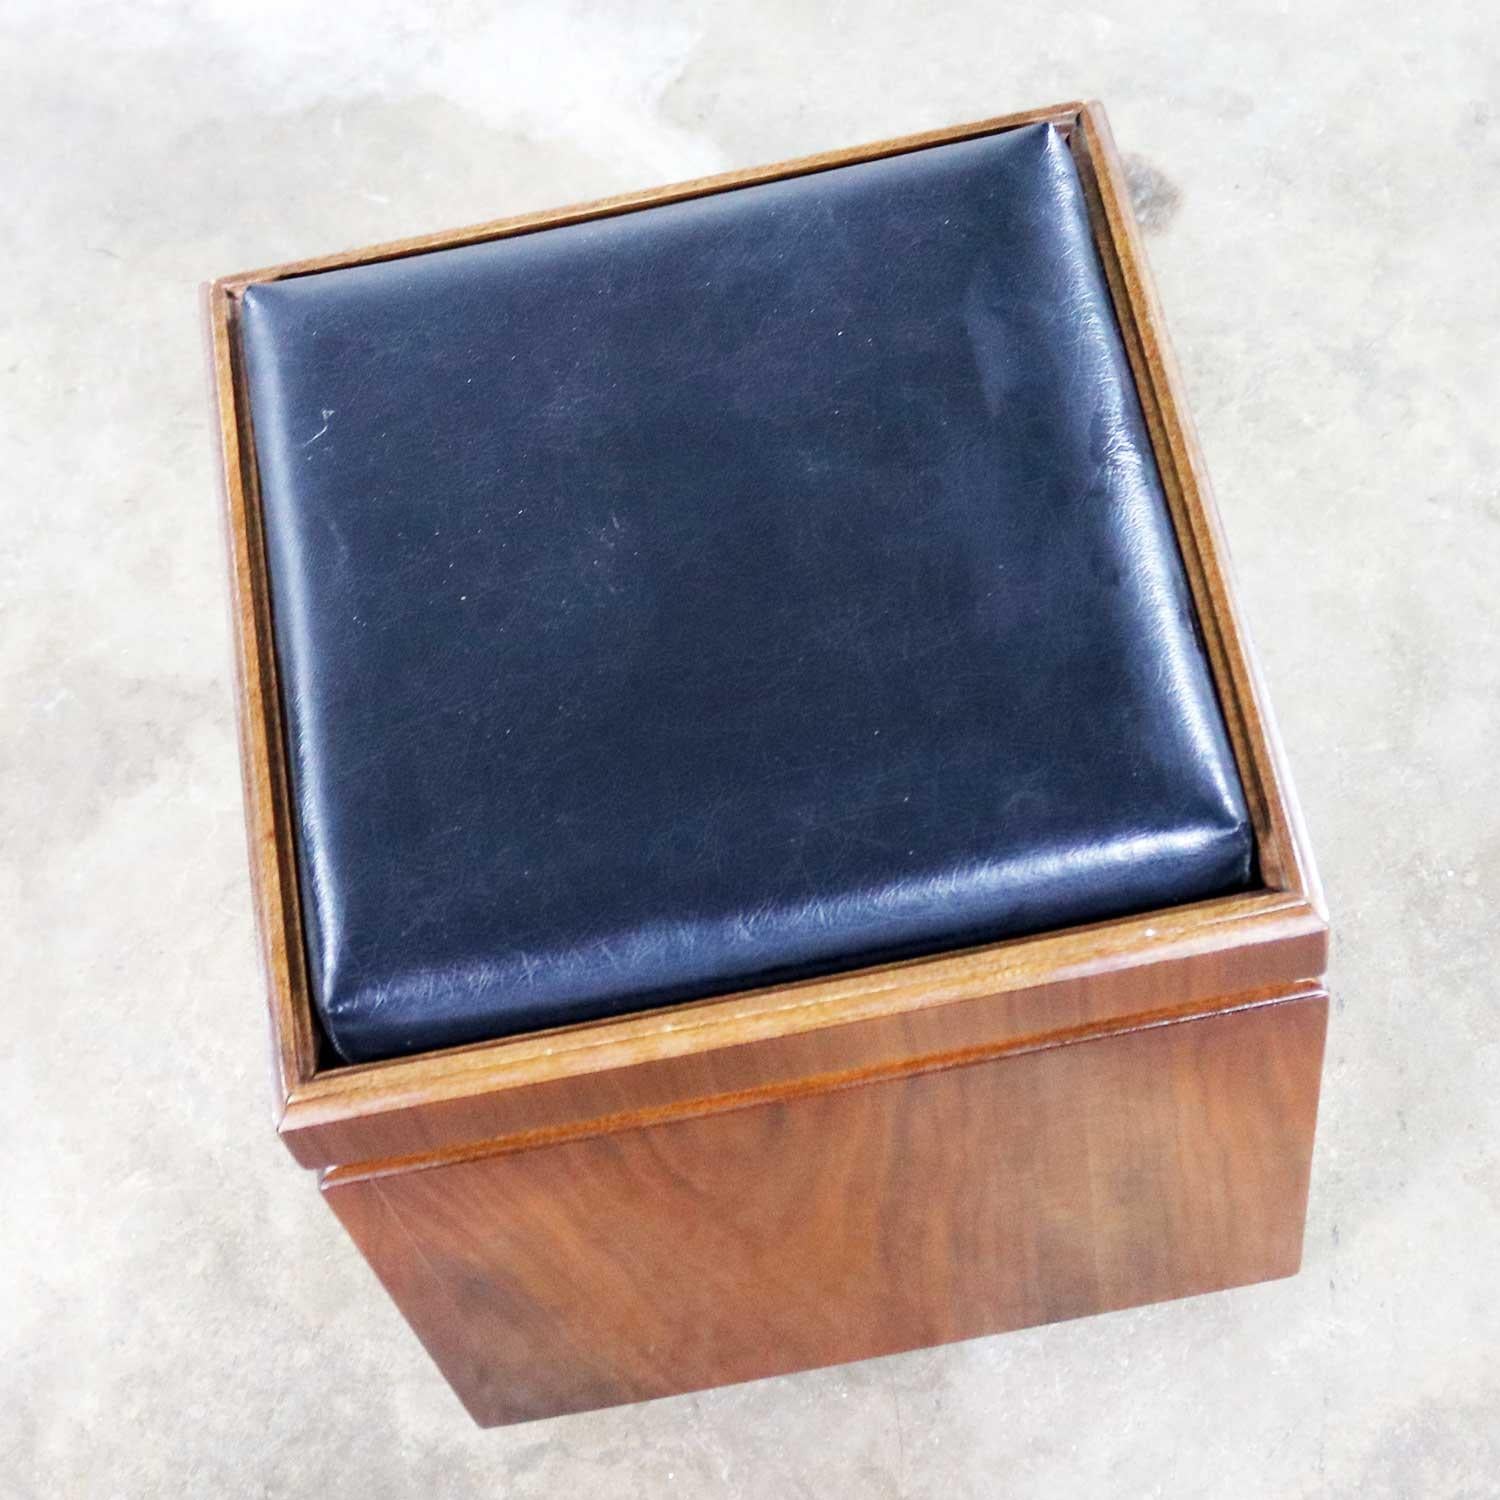 Awesome Mid-Century Modern Lane rolling cube storage ottoman with an upholstered flip top that becomes a checkerboard game tabletop. It is in wonderful original vintage condition with no outstanding flaws that we have observed. Please see photos,